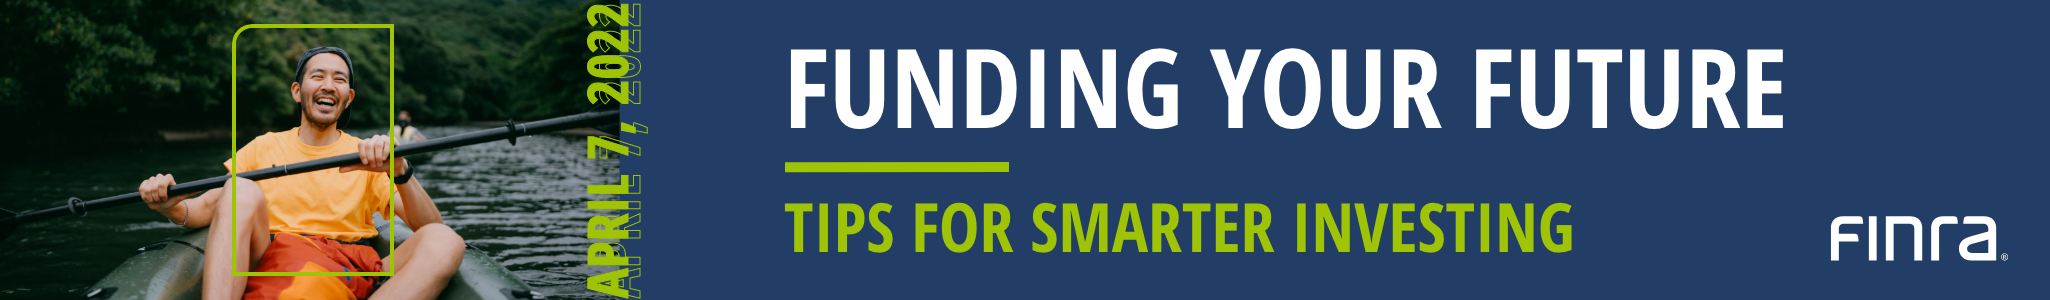 Funding Your Future: Tips for Smarter Investing - April 7, 2022